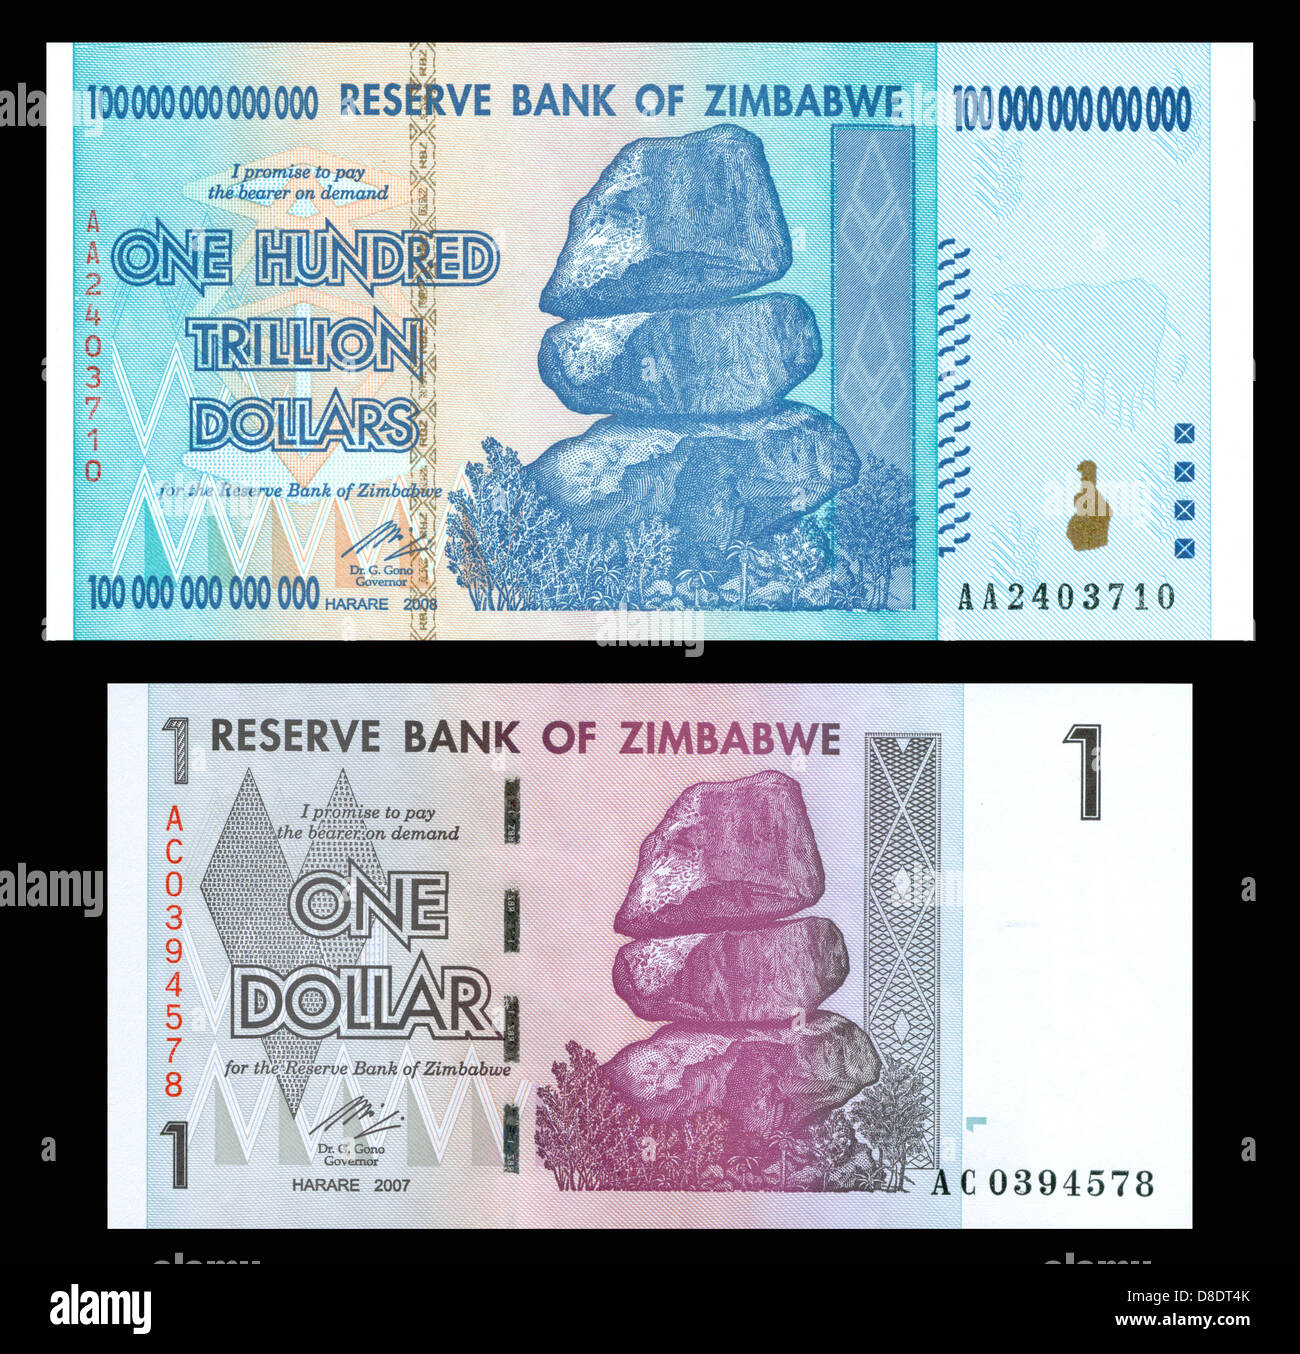 Inflation: One Hundred Trillion Dollar Zimbabwe Bank Note next to 1 dollar note of equal value. Stock Photo